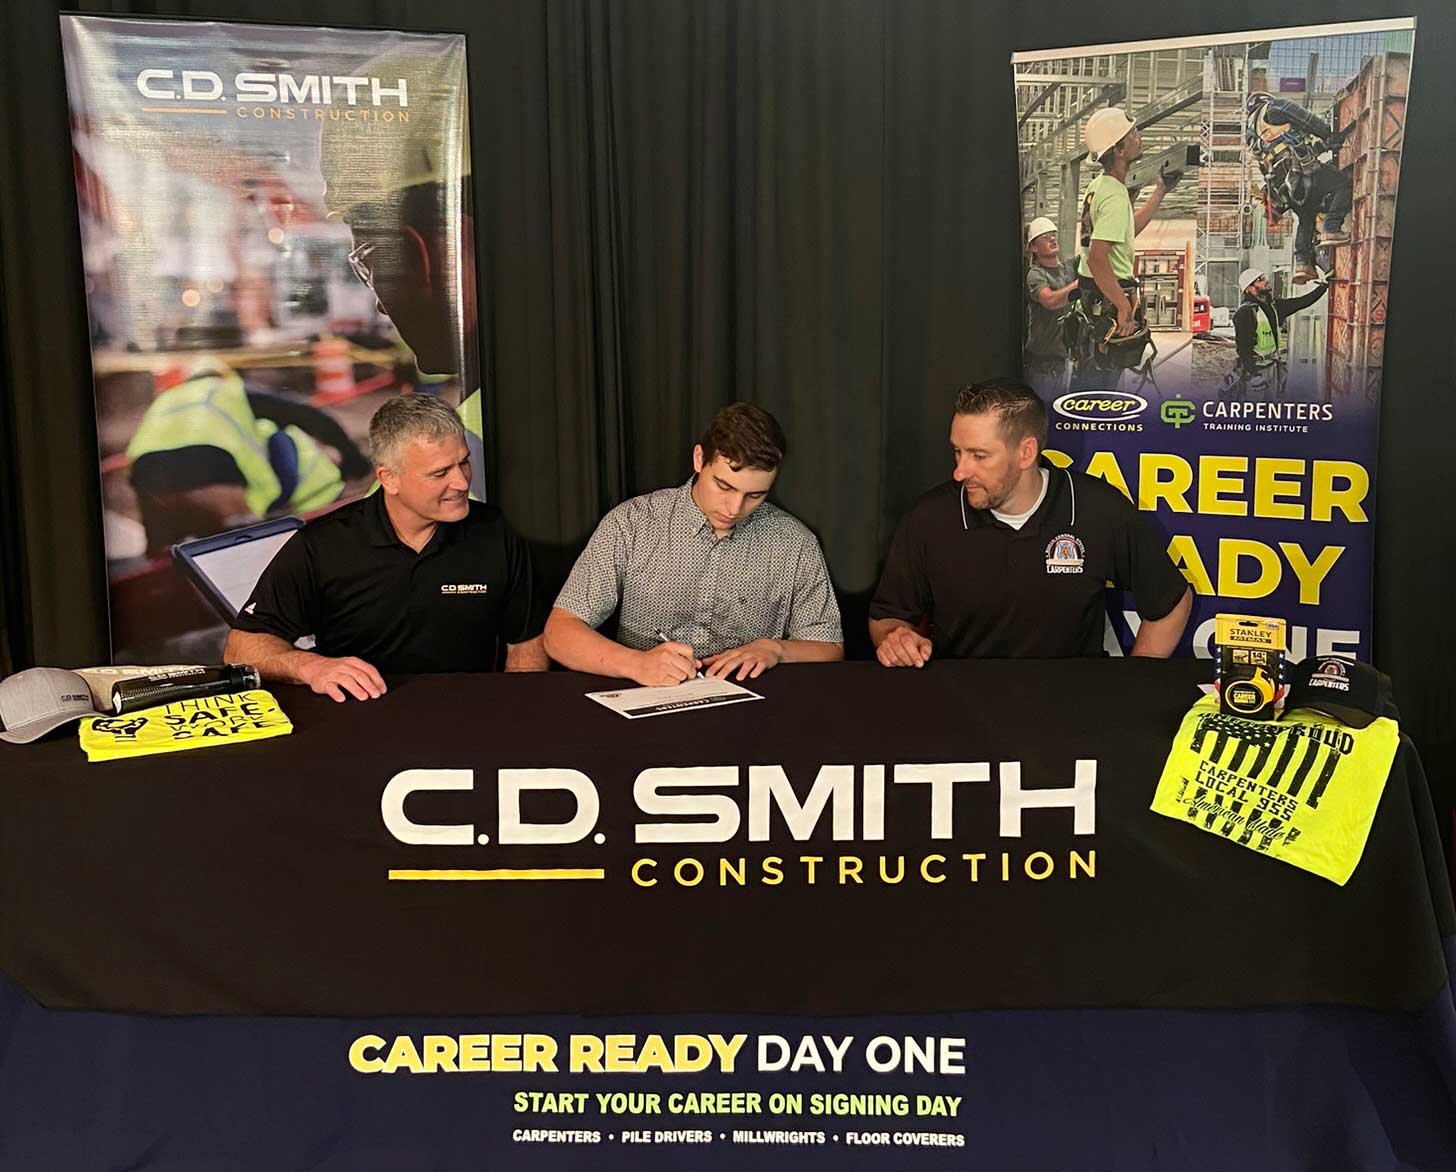 Signing day picture with Riley Zick being hired by C.D. Smith Construction while pursuing a carpentry apprenticeship